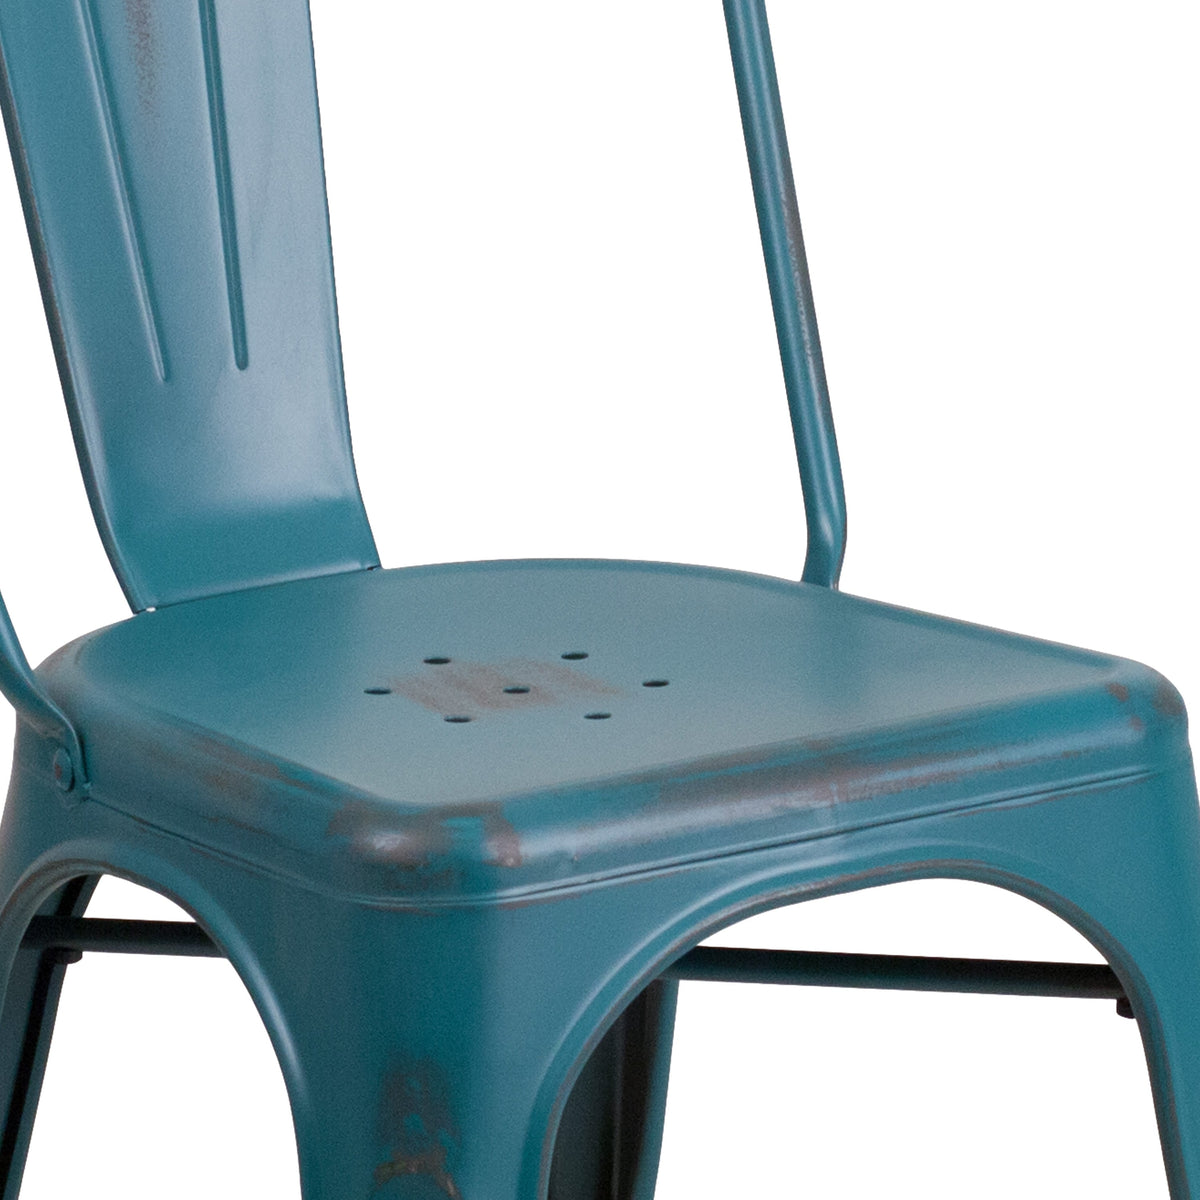 Kelly Blue-Teal |#| Distressed Blue-Teal Metal Indoor-Outdoor Stackable Chair - Kitchen Furniture